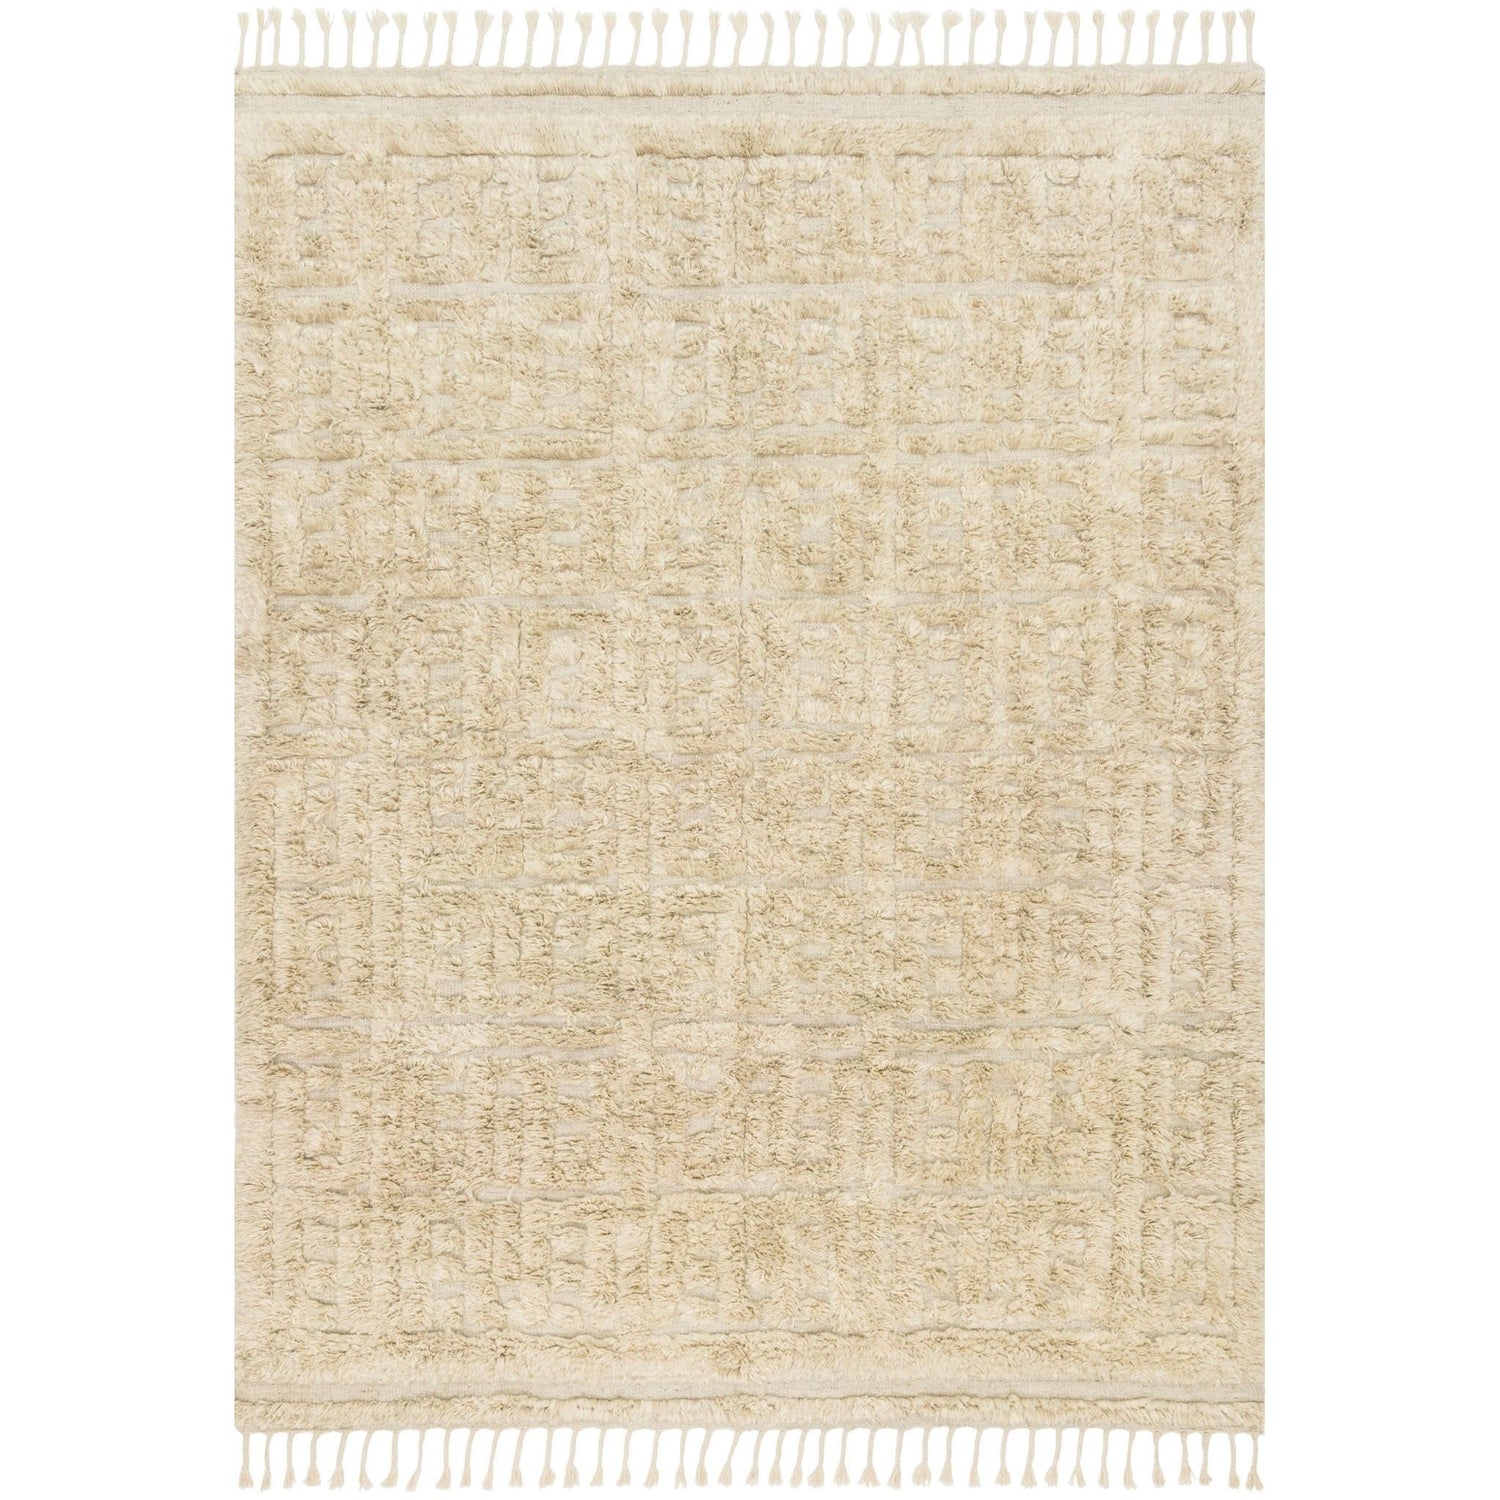 Inspired by Scandinavian textile motifs, the Hygge rug collection by Loloi combines a soft shaggy texture with an enduring neutral palette. Each piece is hand-loomed in India of 100% wool, ensuring long-wearing durability in even the busiest of rooms.  Hand Loomed 100% Wool YG-04 Oatmeal/Sand